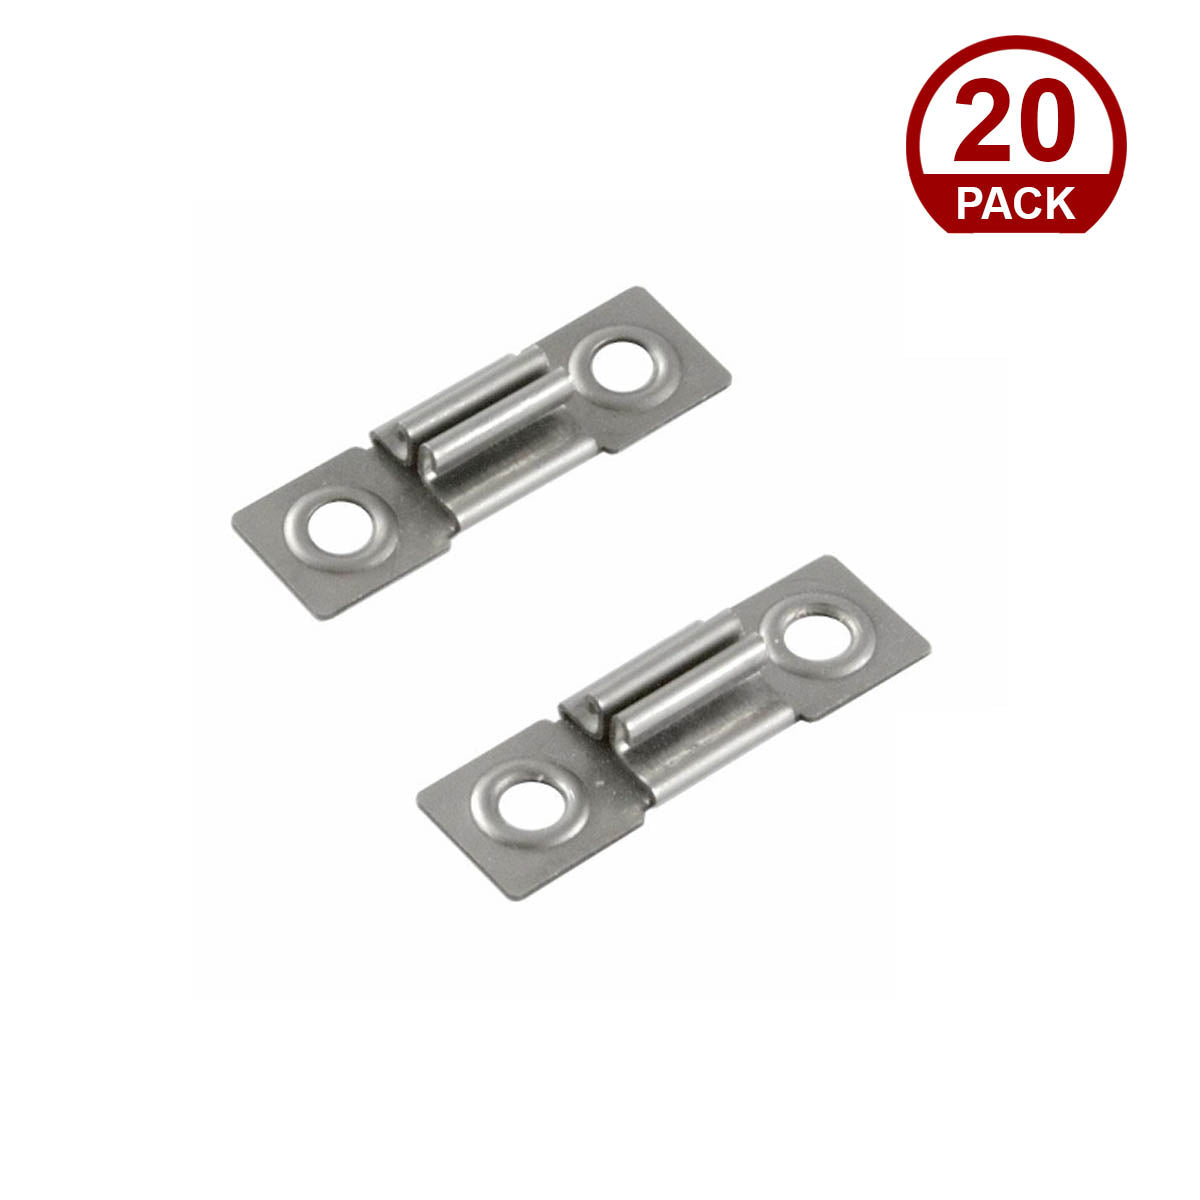 Chromapath Standard Mounting Clips for Square, 45°, and DUO Channels, Pack of 20